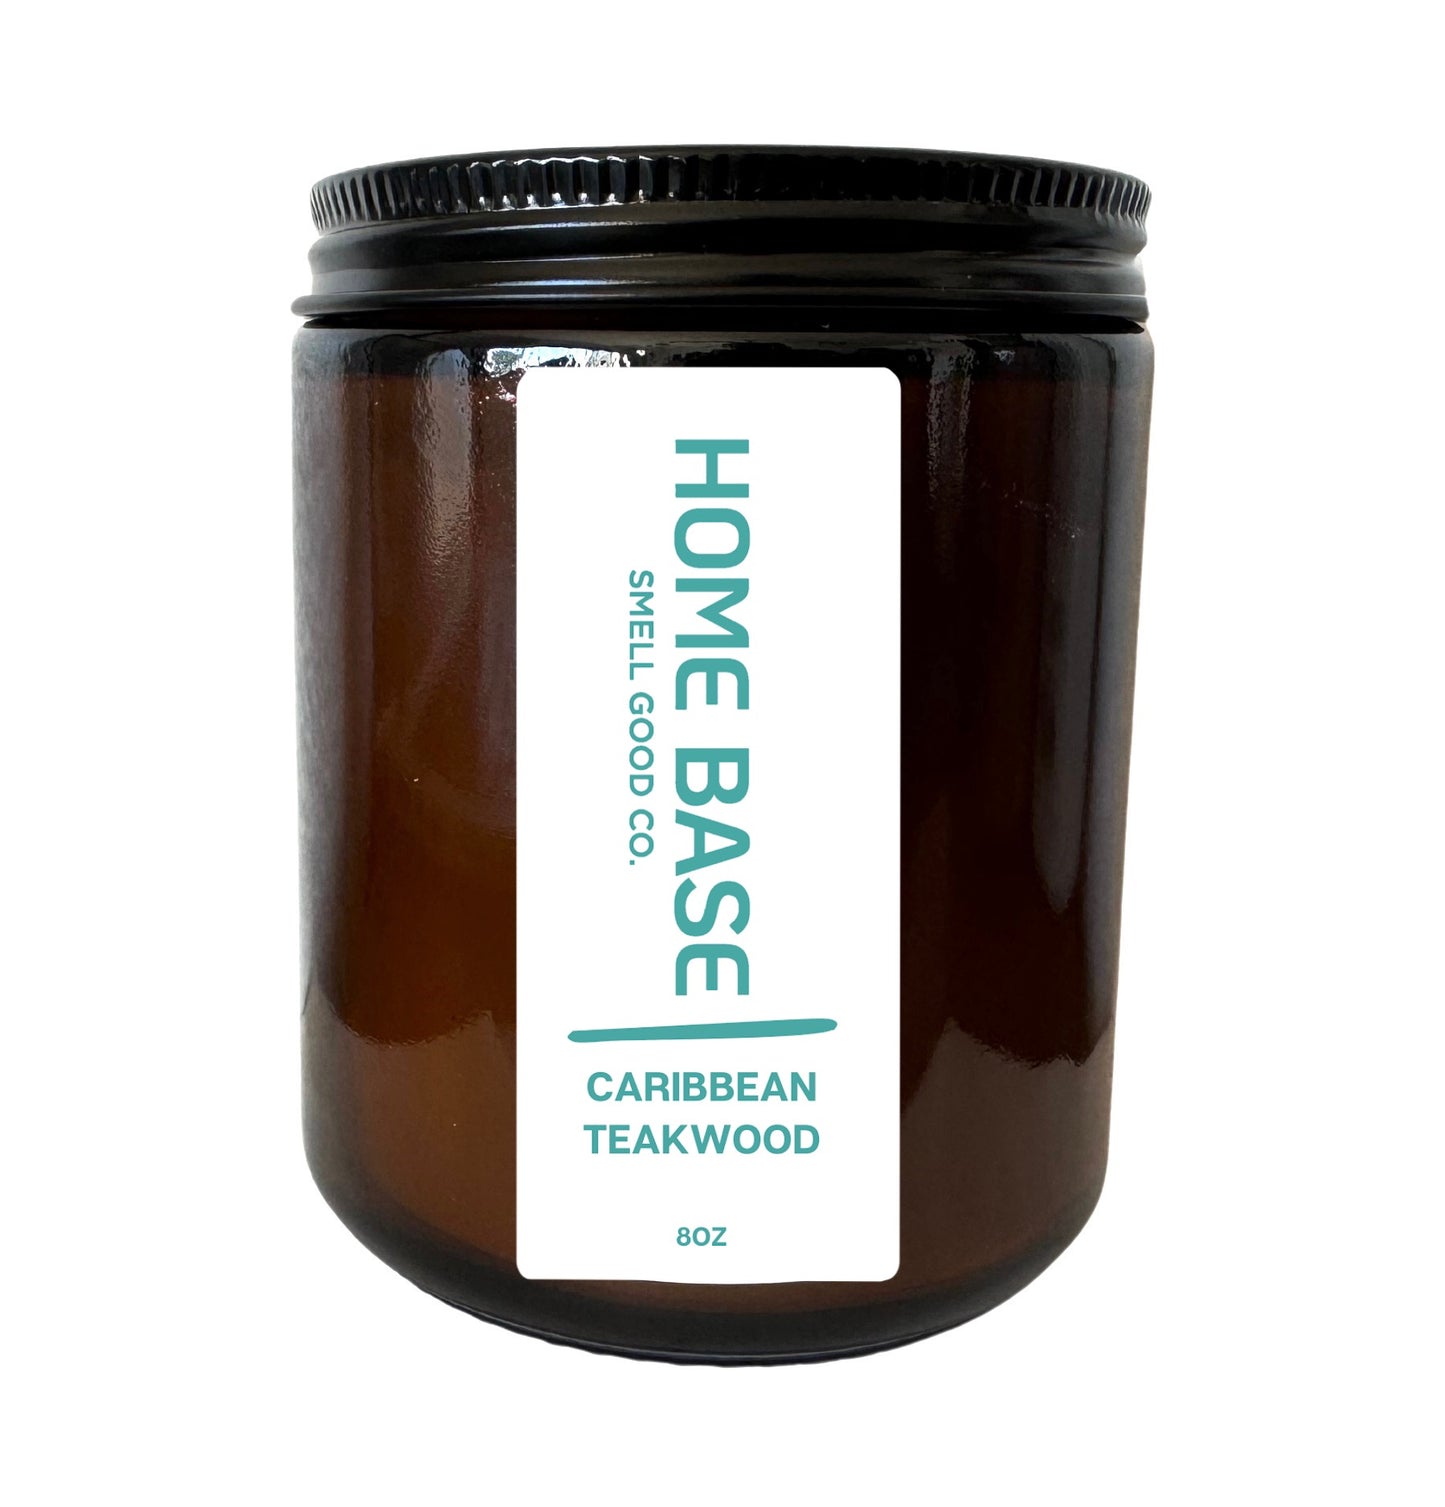 a. Caribbean Teakwood Scented Candle